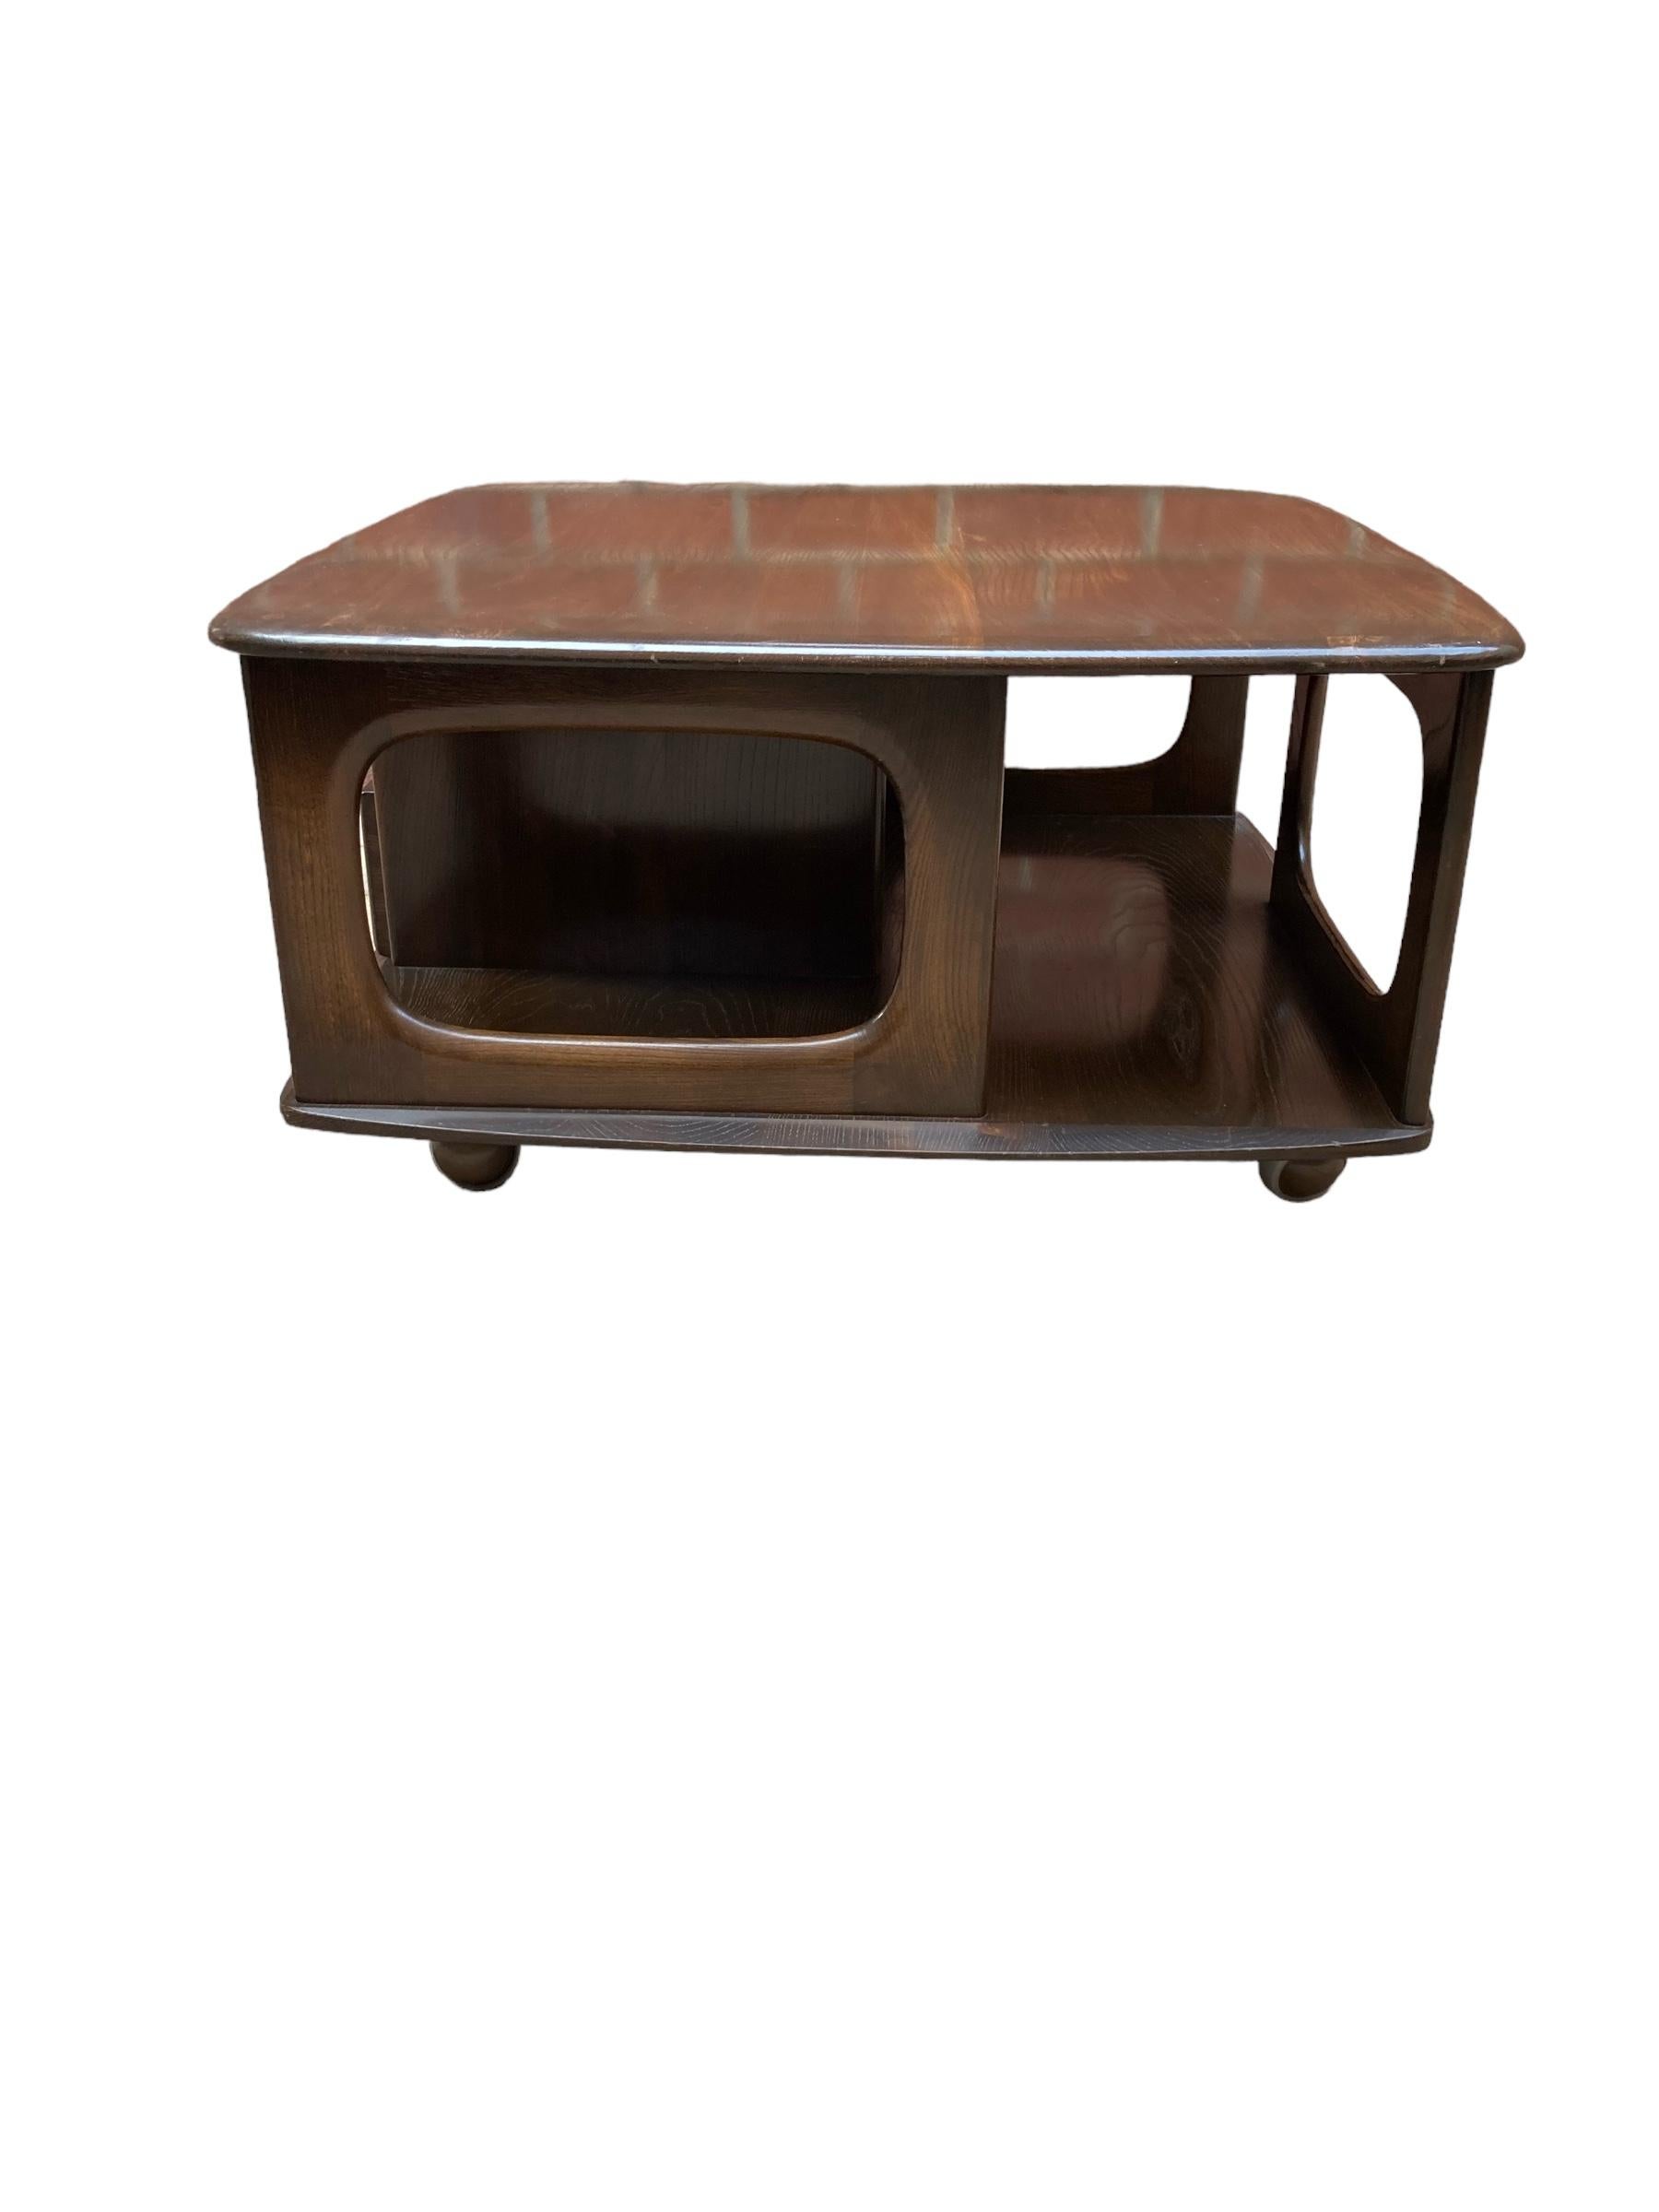 Minimalist Vintage Ercol Pandora Console Coffee table on wheels For Sale